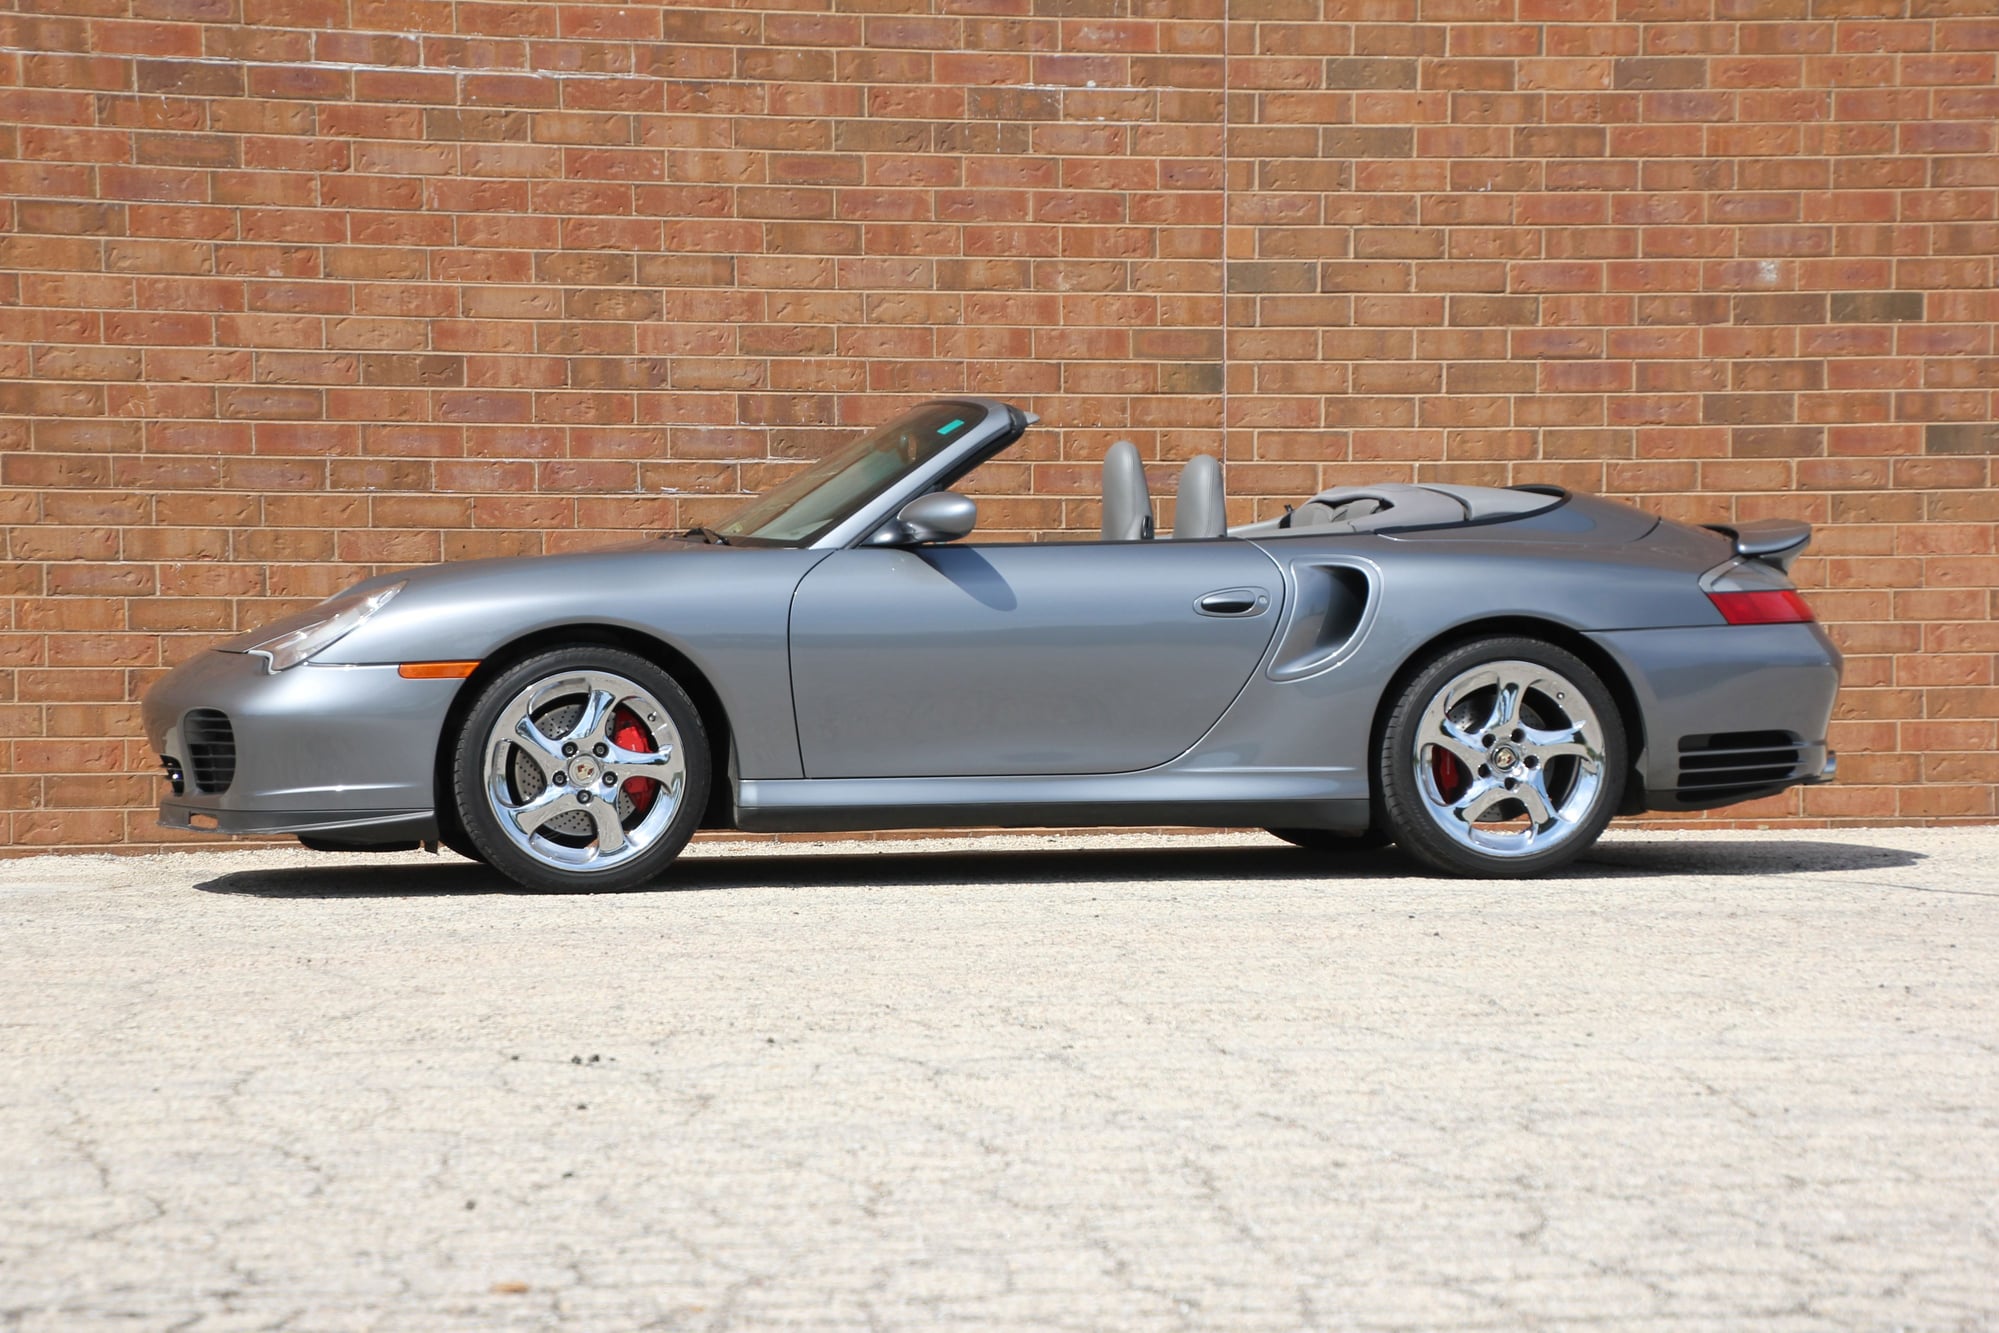 2004 Porsche 911 - 2004 Porsche 911 Turbo Cabriolet X50!  6-Speed Manual Transaxle!  This is the one!! - Used - VIN WP0CB29904S675555 - 64,274 Miles - 6 cyl - 4WD - Manual - Convertible - Gray - Waterford, WI 53185, United States